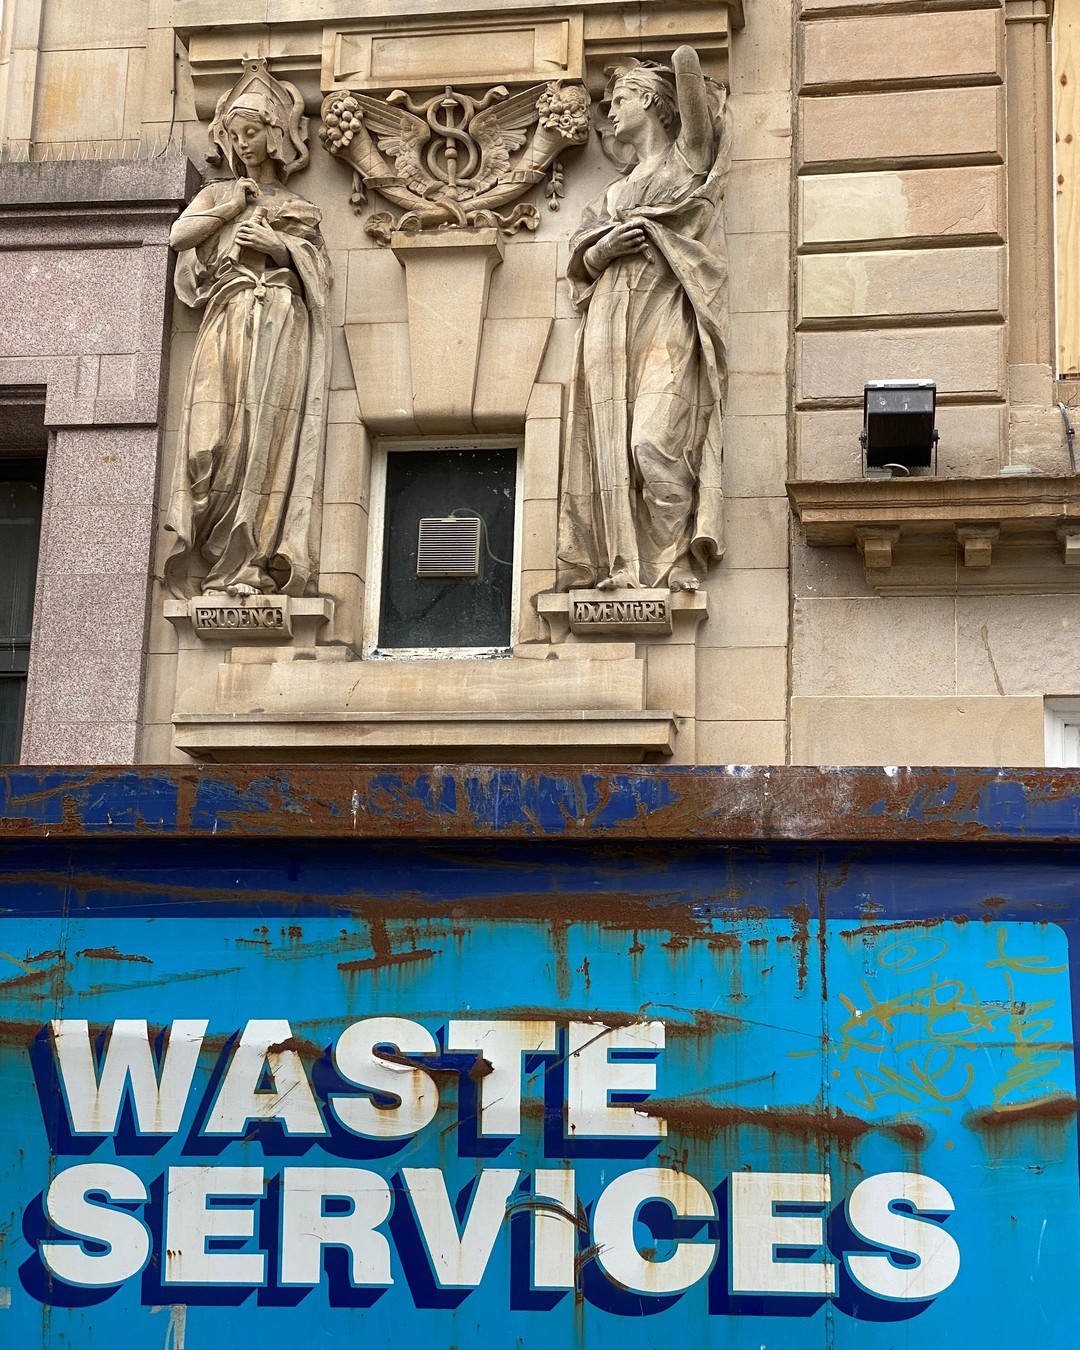 Prudence, Adventure, Waste Services